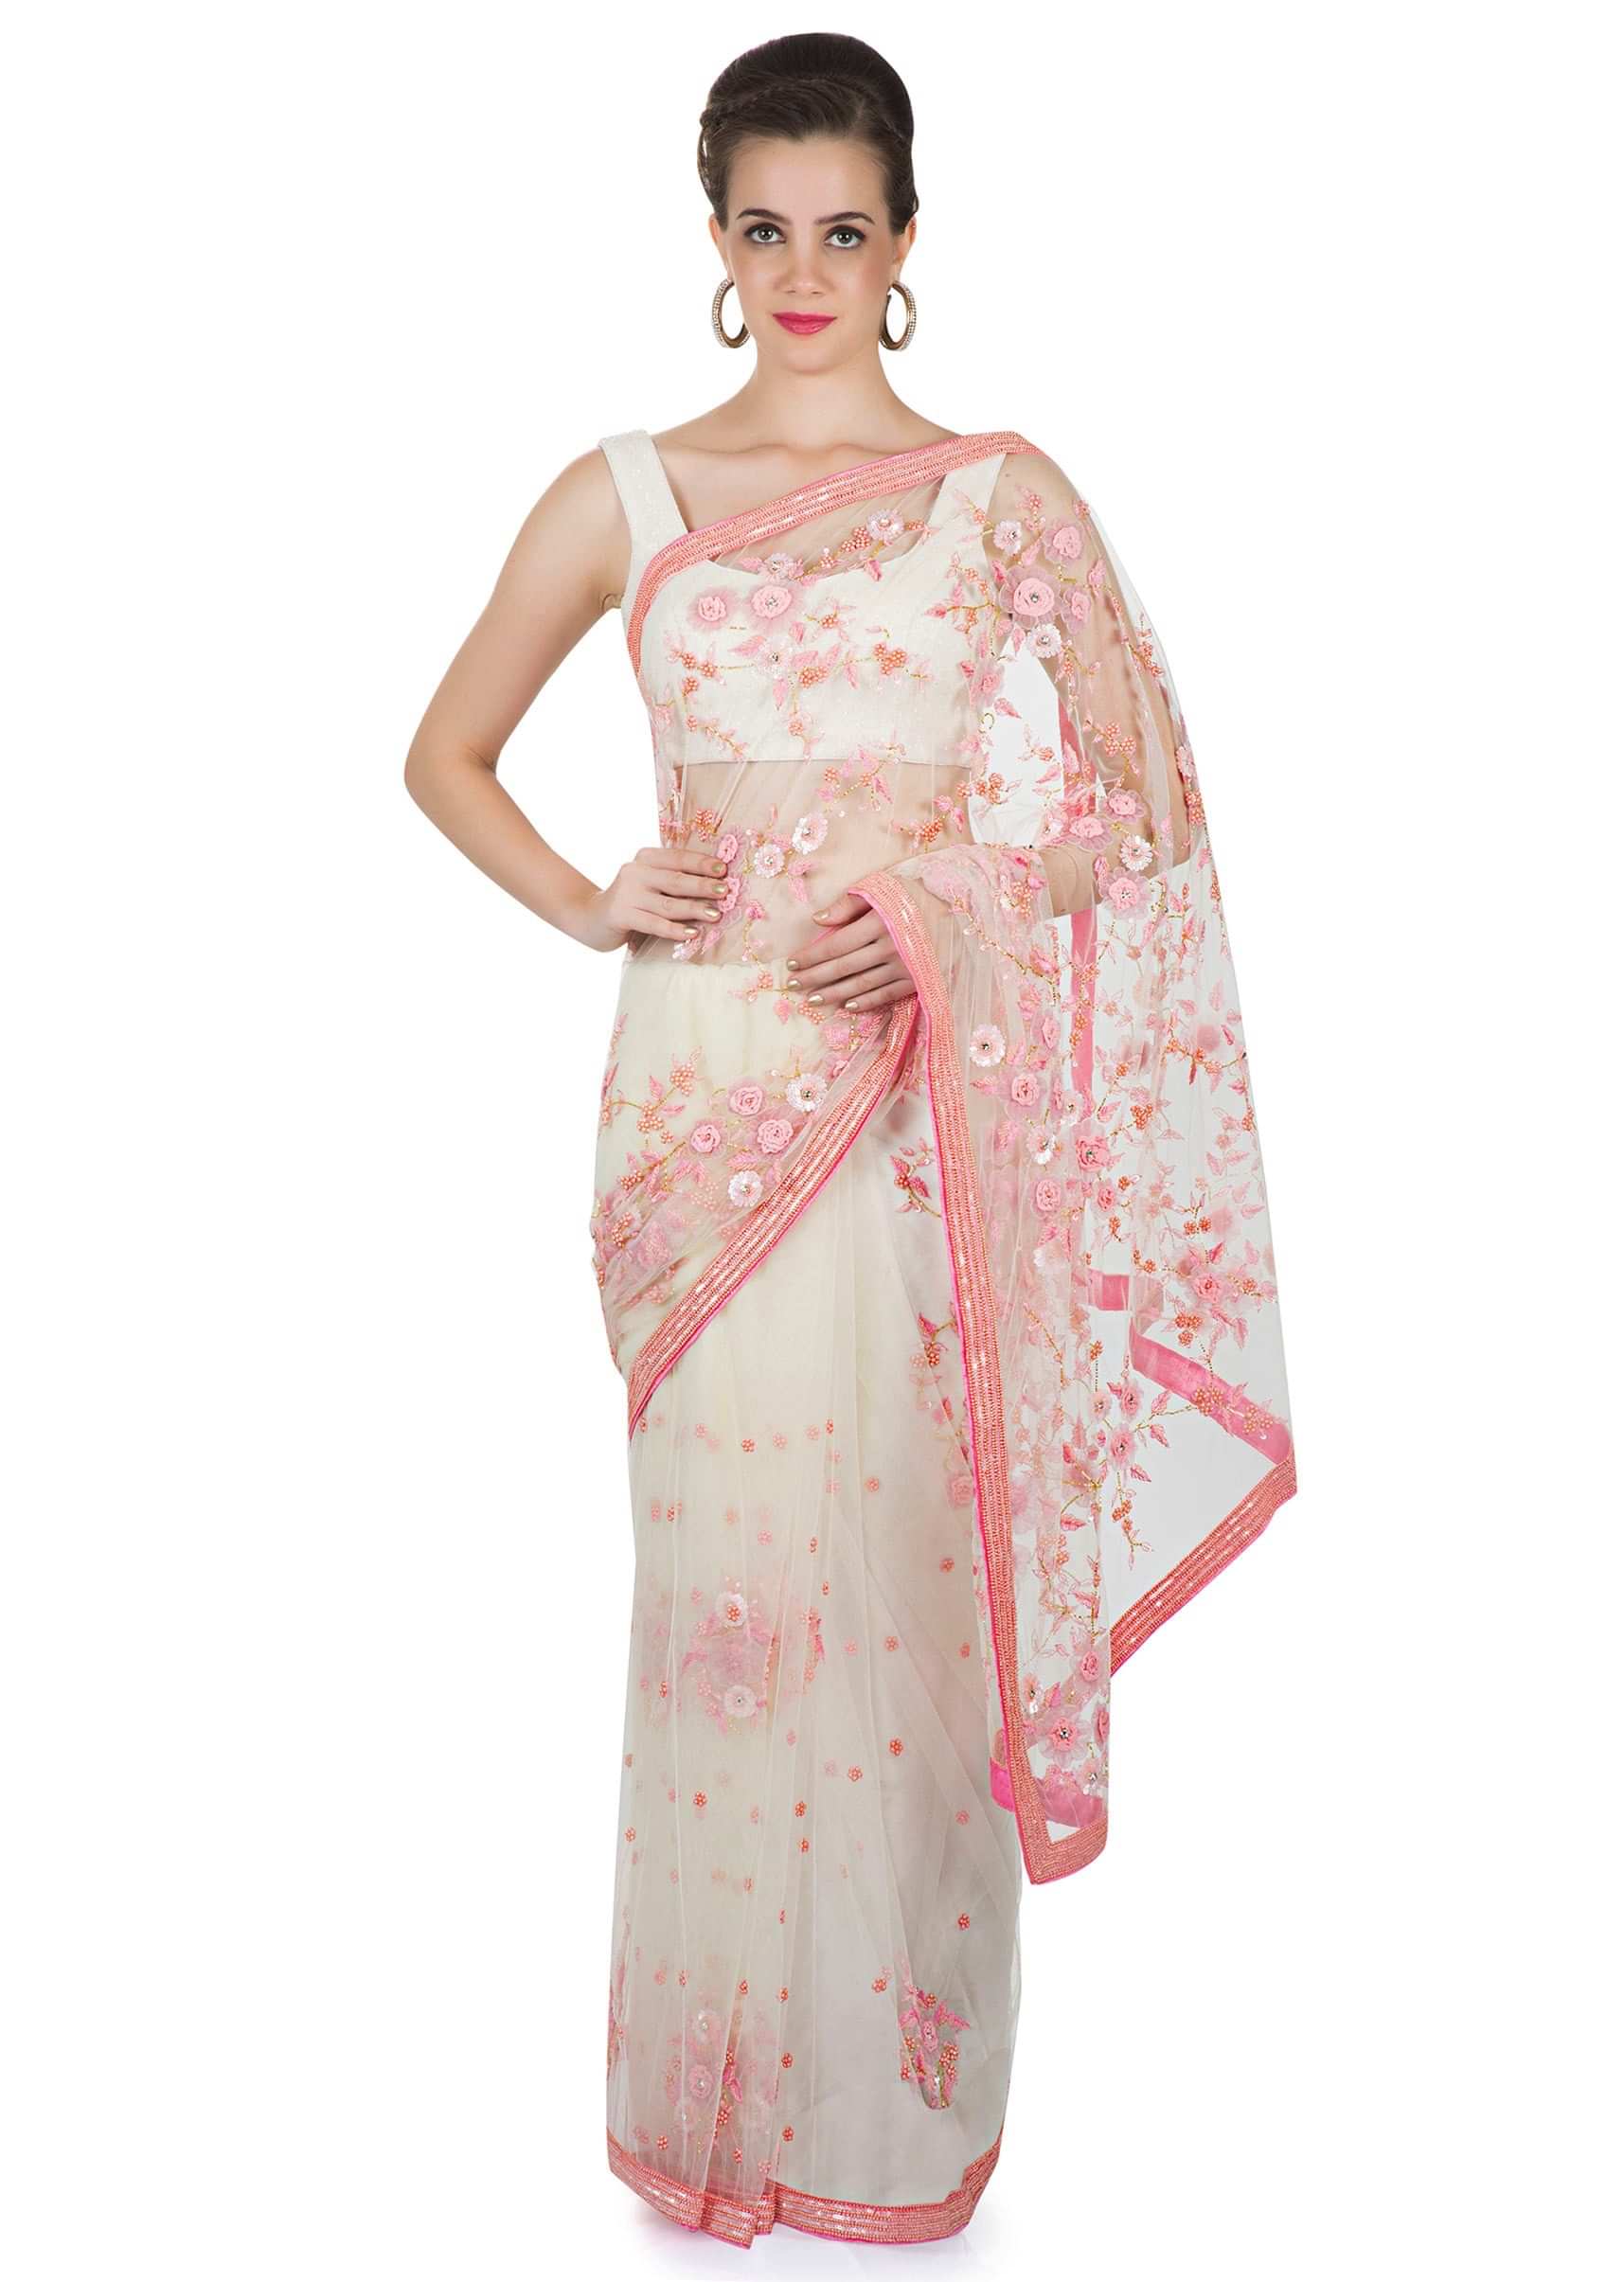 White Net Saree with 3D Flowers, Sequins, Pearls and Cut Dana Details only on Kalki